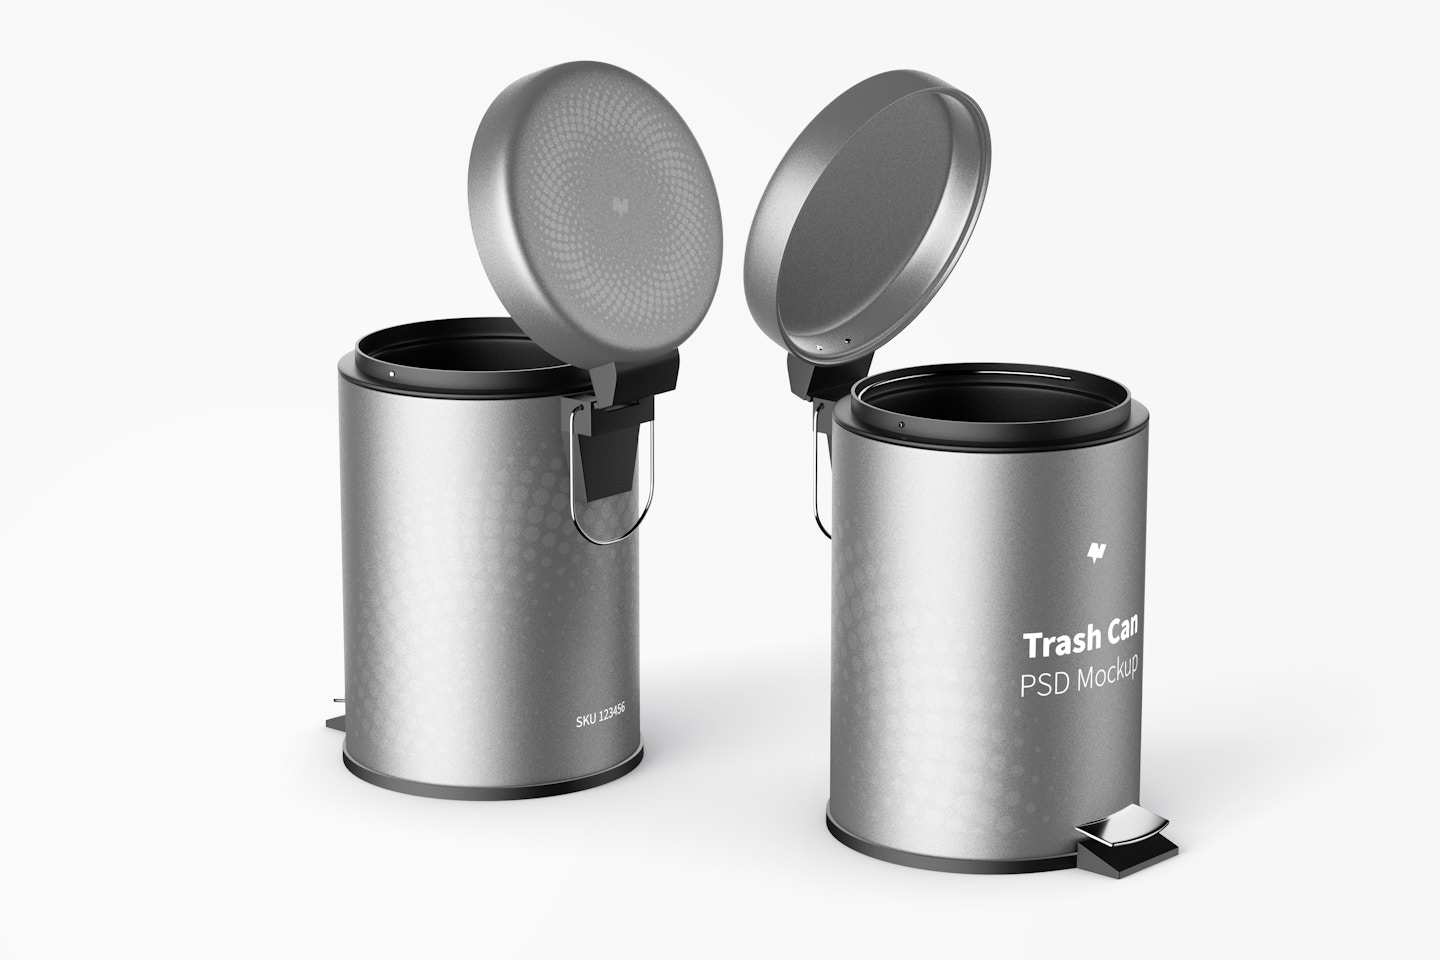 Trash Cans With Foot Pedal Mockup